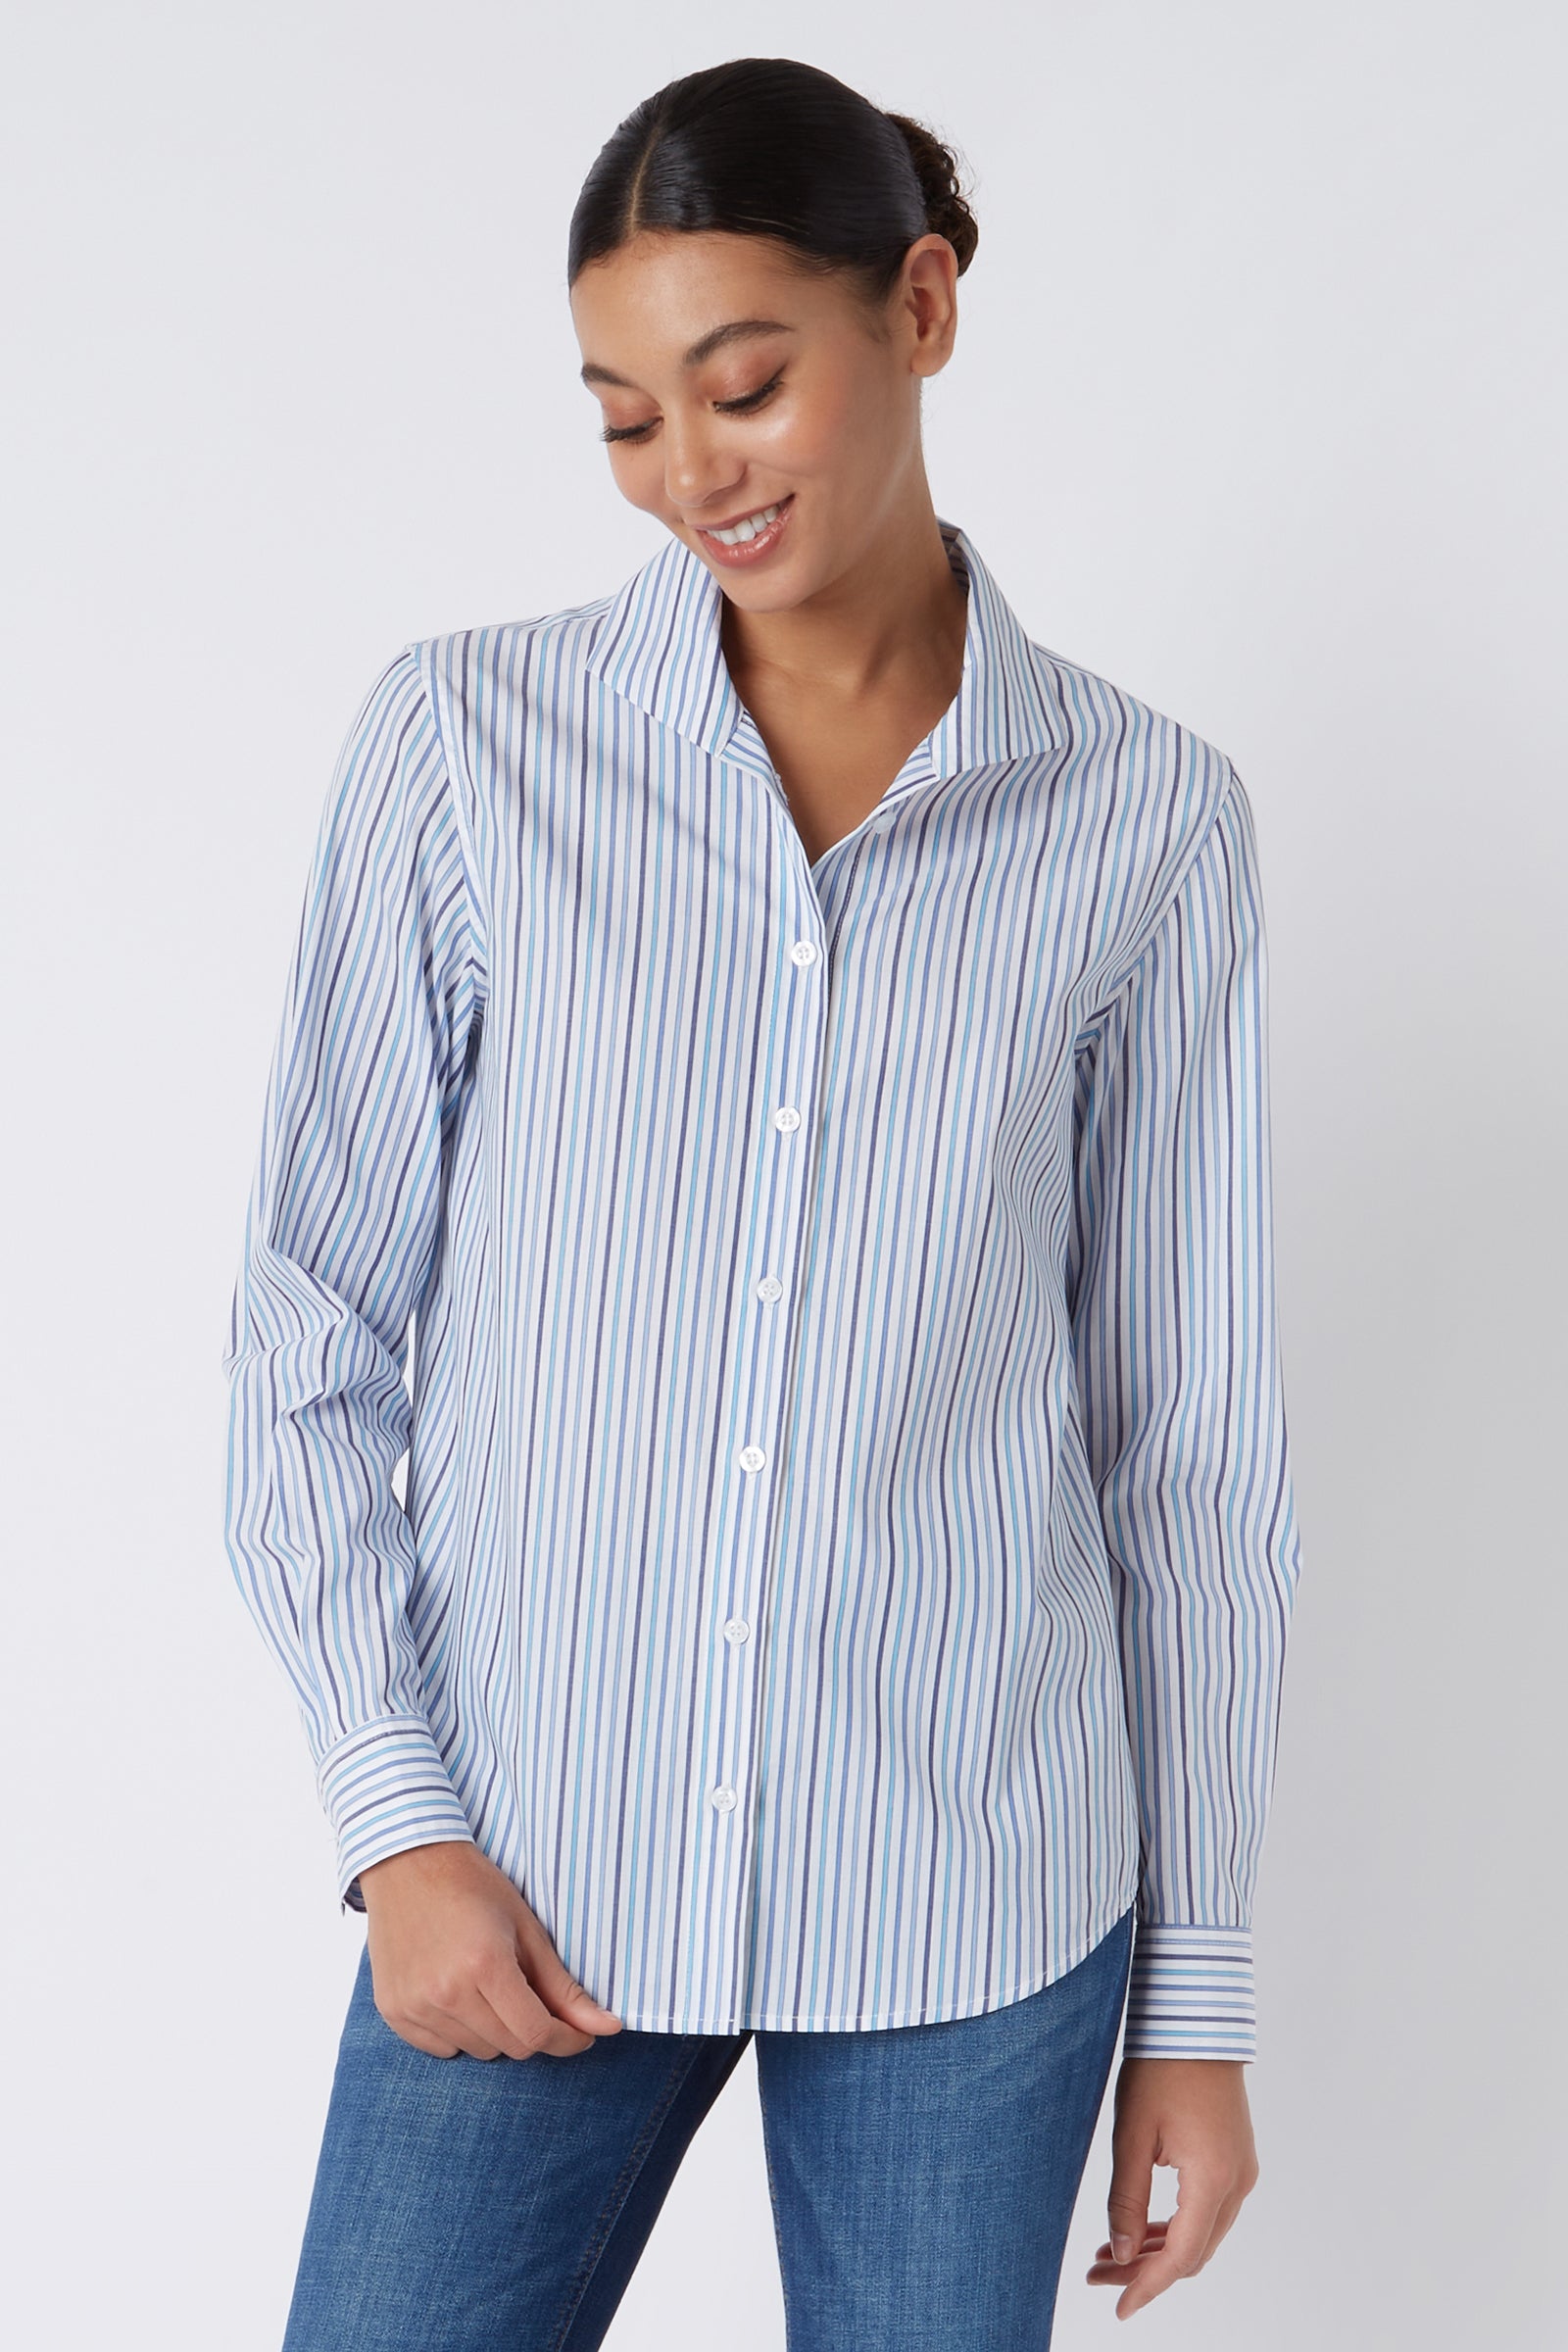 Kal Rieman Ginna Box Pleat Shirt in Multi Stripe Navy on Model Looking Down Cropped Front View